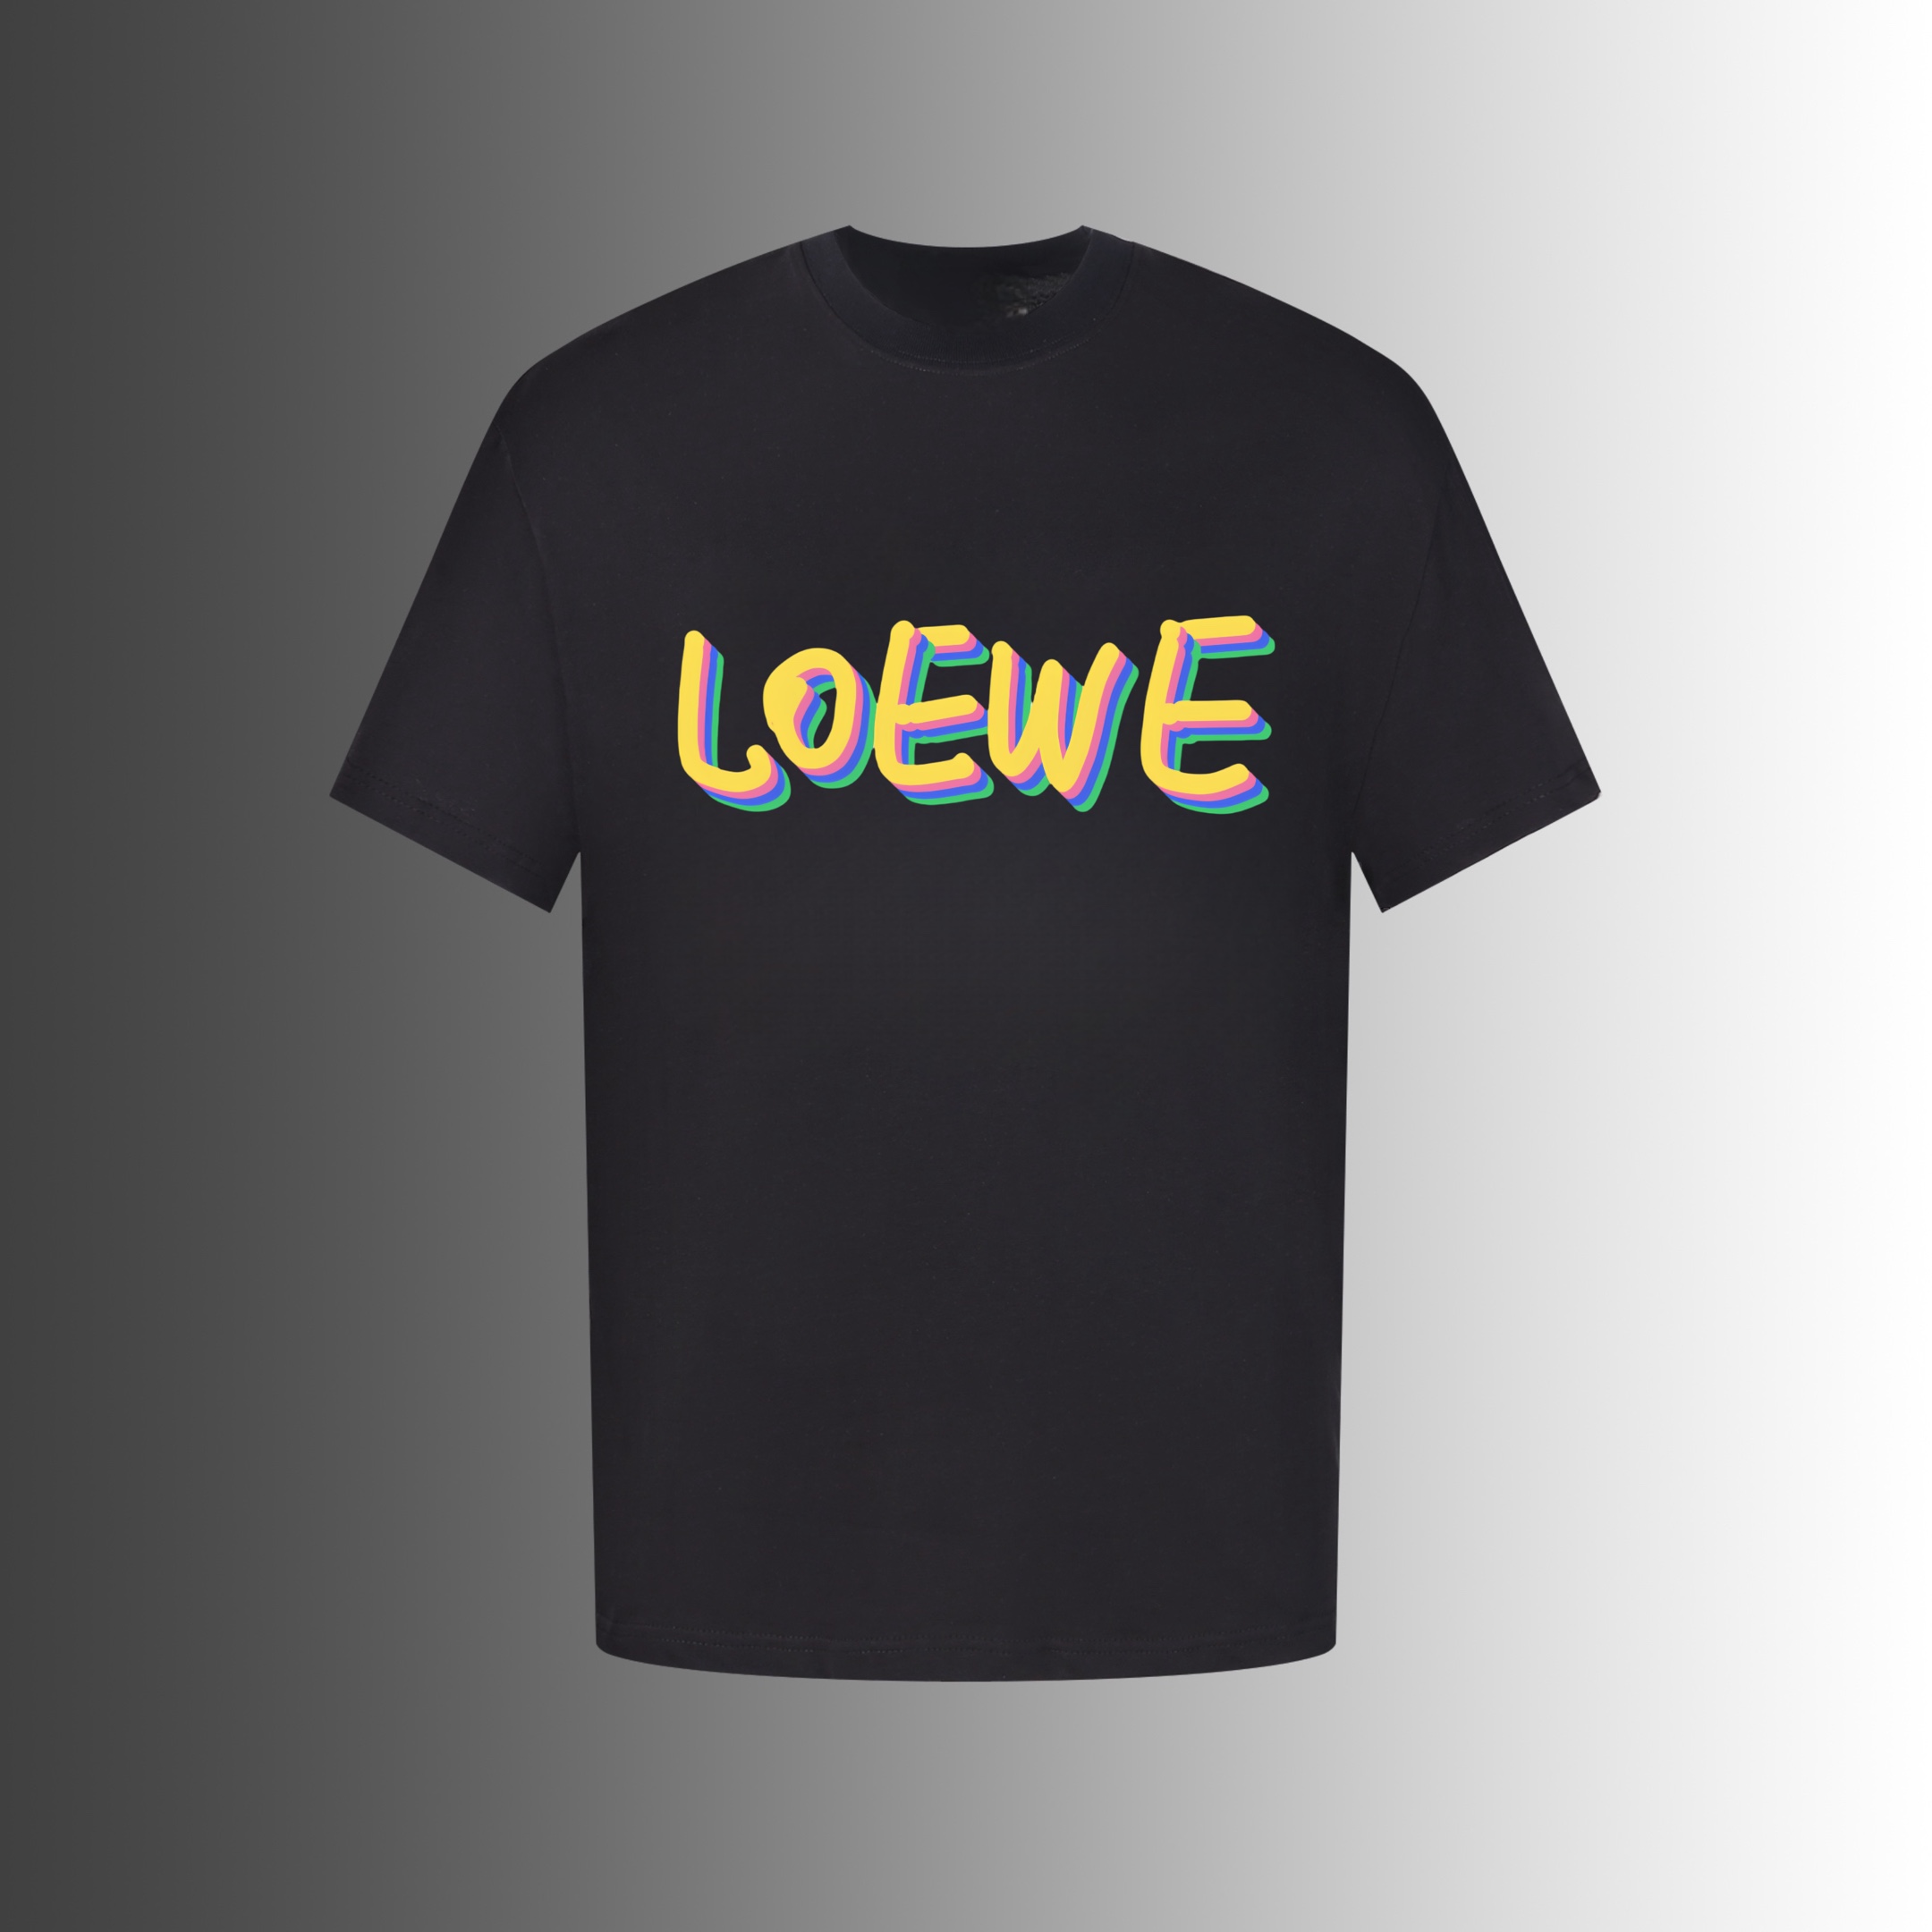 Loewe Clothing T-Shirt Printing Unisex Cotton Spring/Summer Collection Short Sleeve